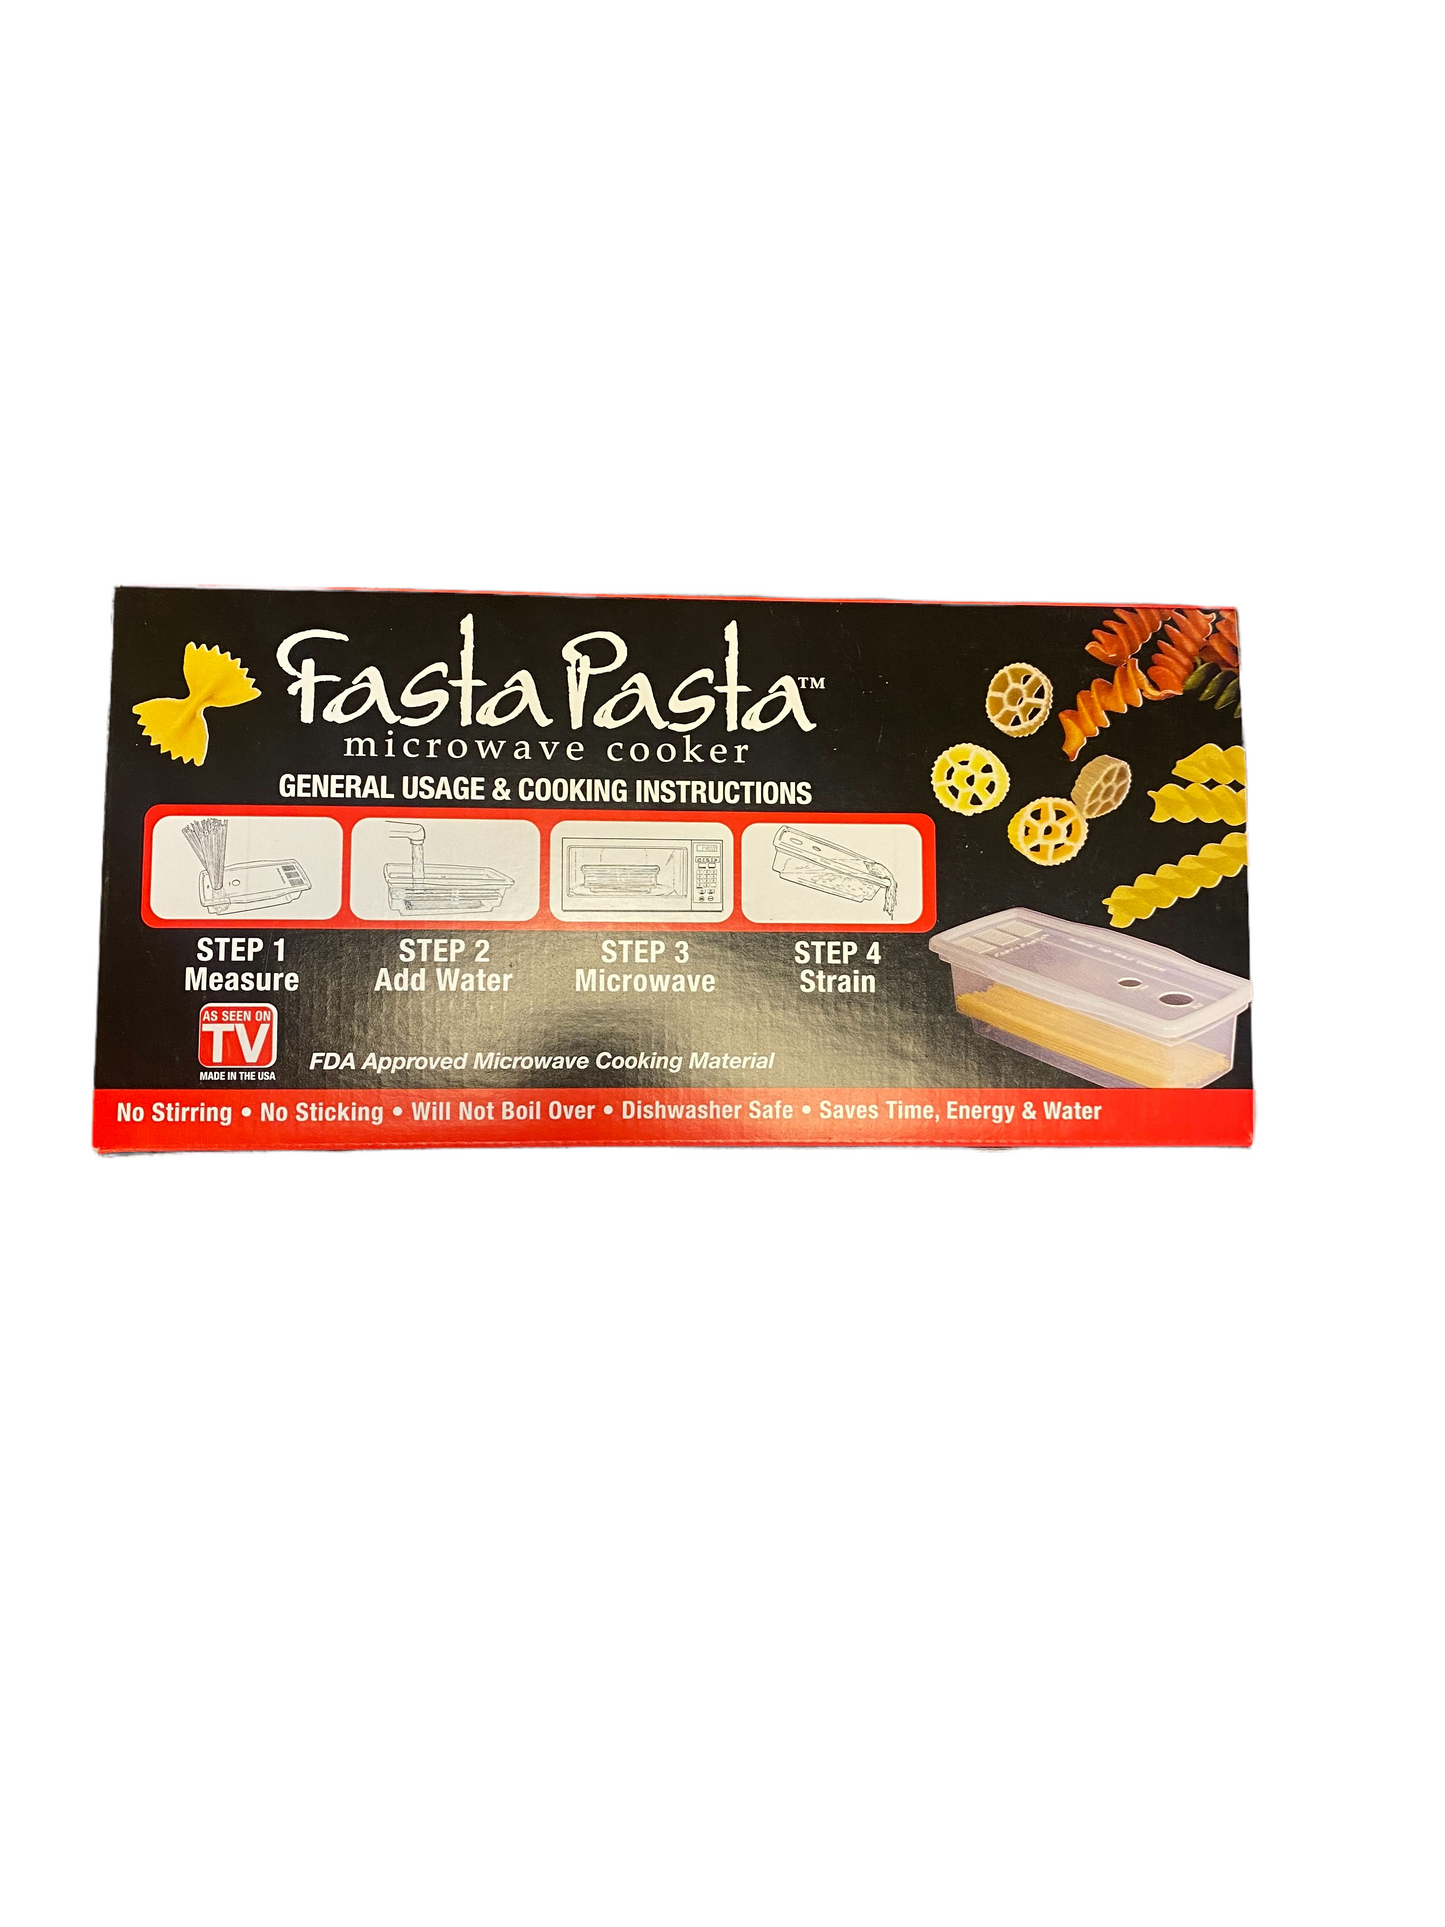 Microwave Pasta Cooker The Original Fasta Pasta As seen on TV NEW in box Unused